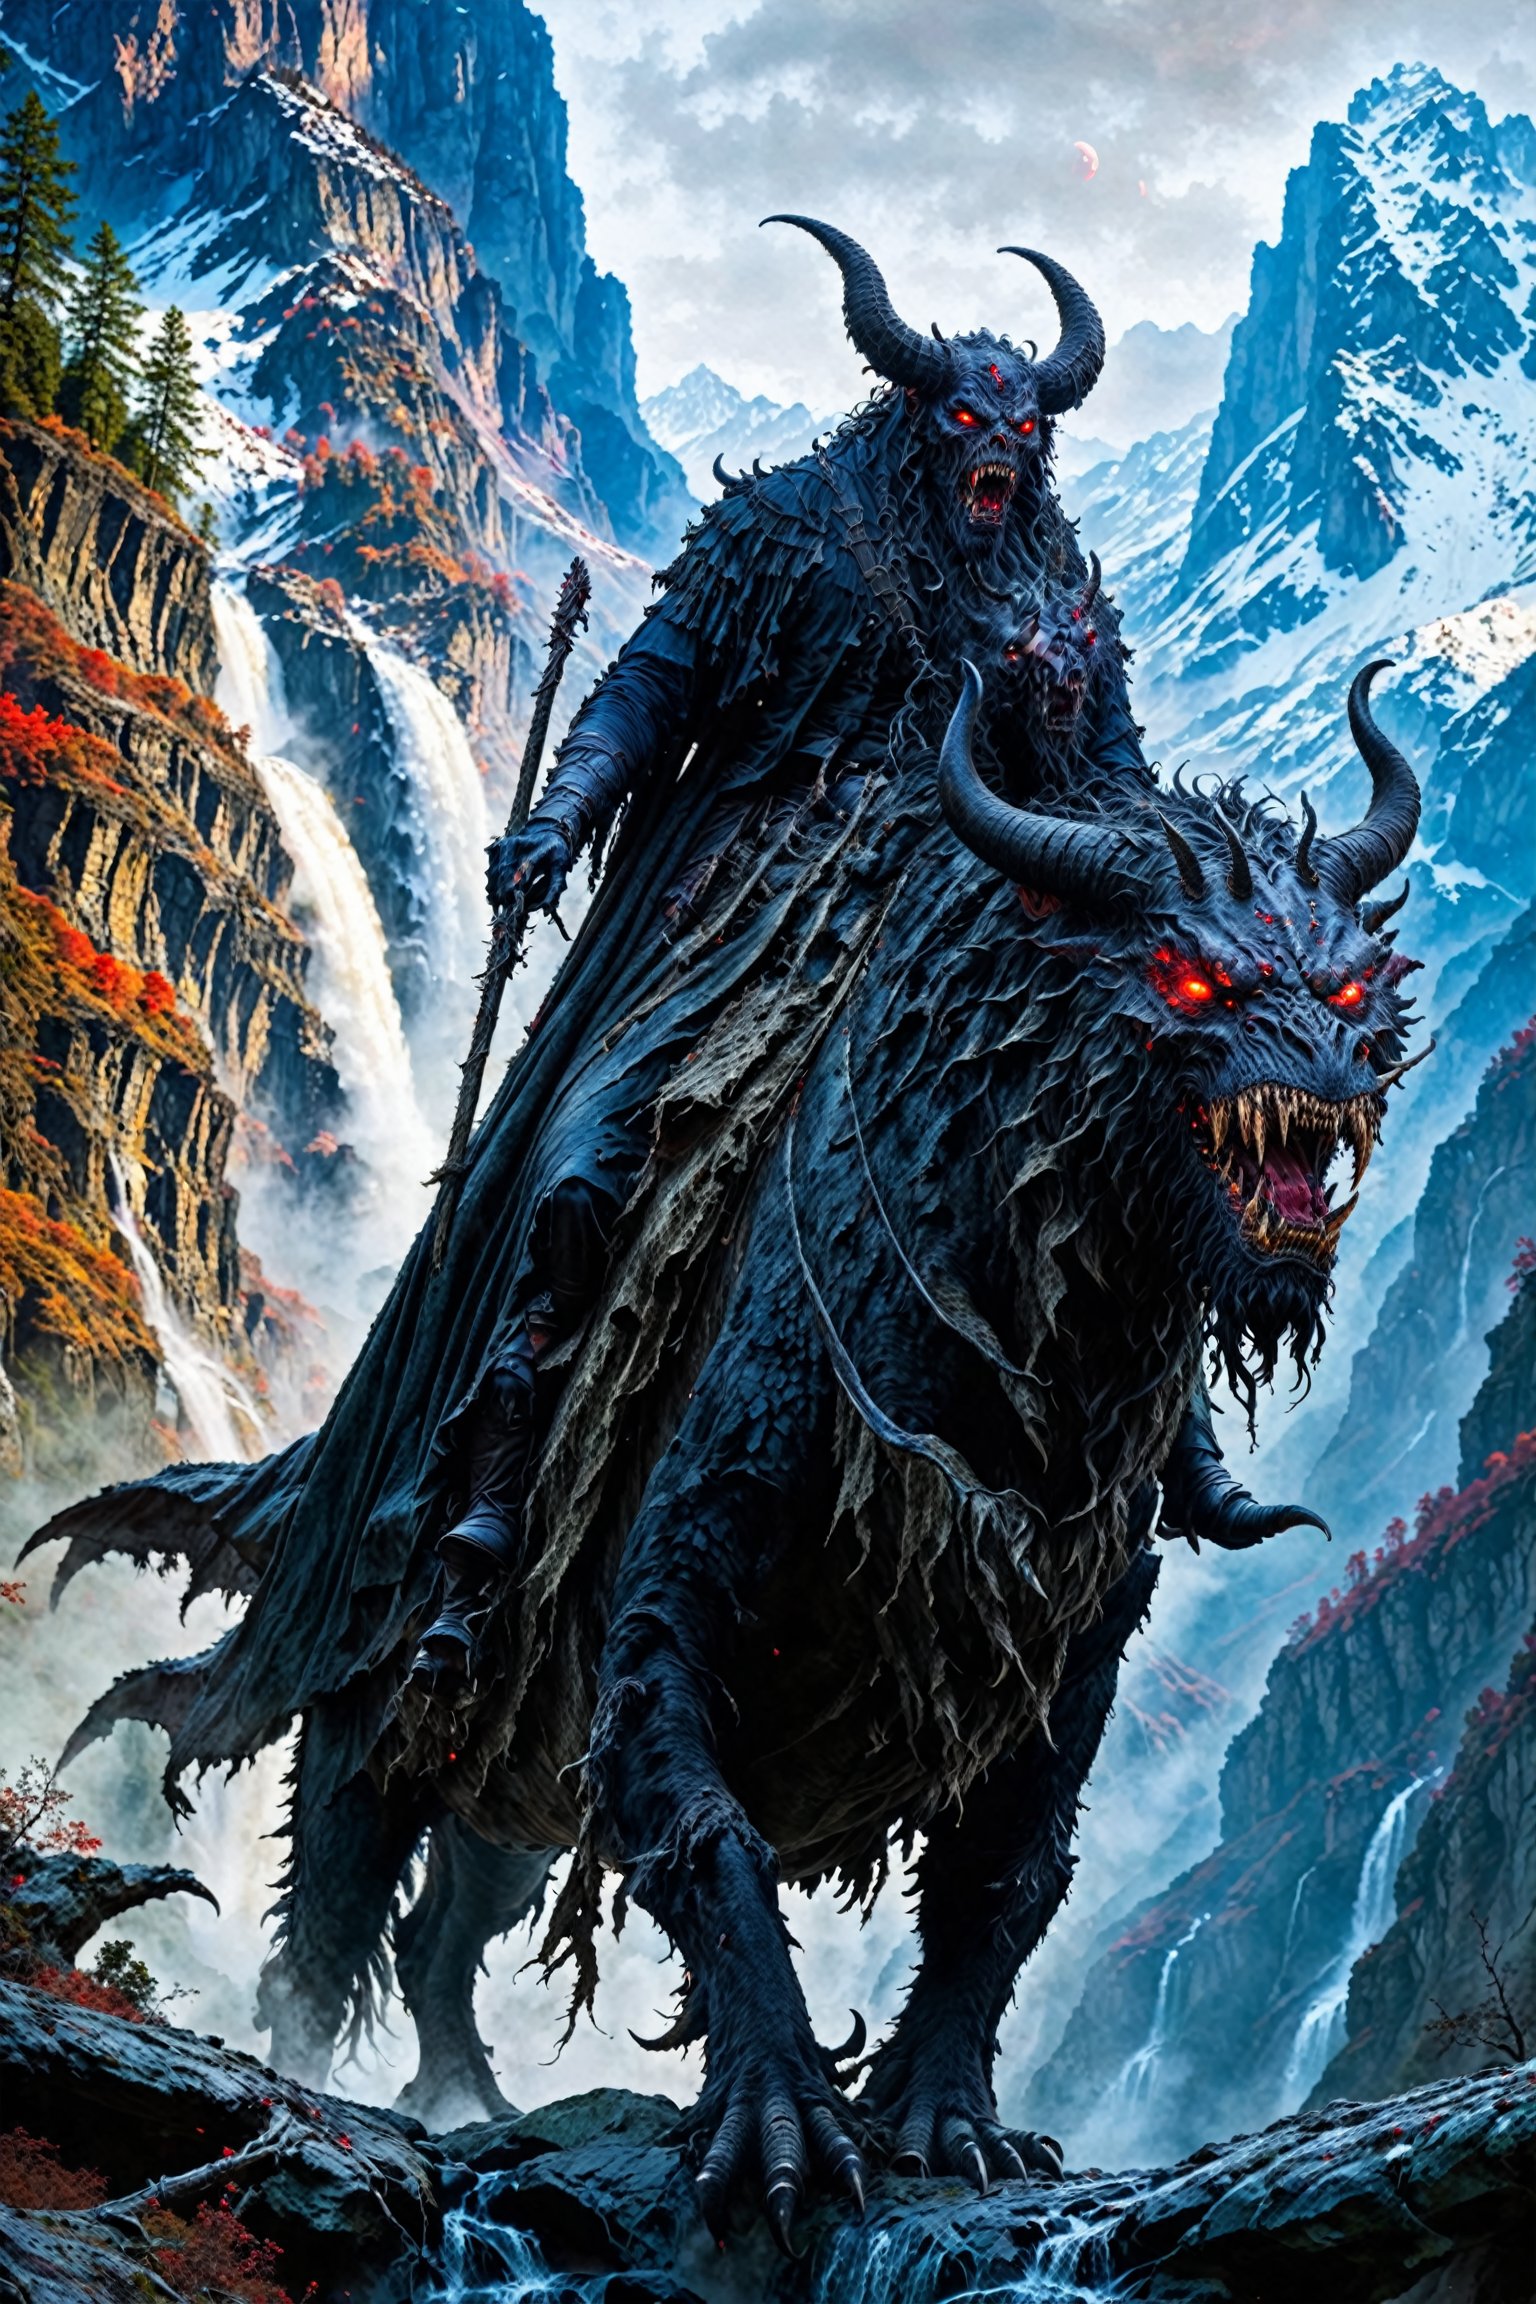 A menacing figure, possibly a demon or a mythical creature, riding a beast with glowing red eyes. The creature has large, curved horns and is draped in tattered, dark clothing. The backdrop is a rugged mountainous terrain with snow-capped peaks, dense forests, and cascading waterfalls. The atmosphere is misty and eerie, suggesting a cold, possibly haunted, environment.